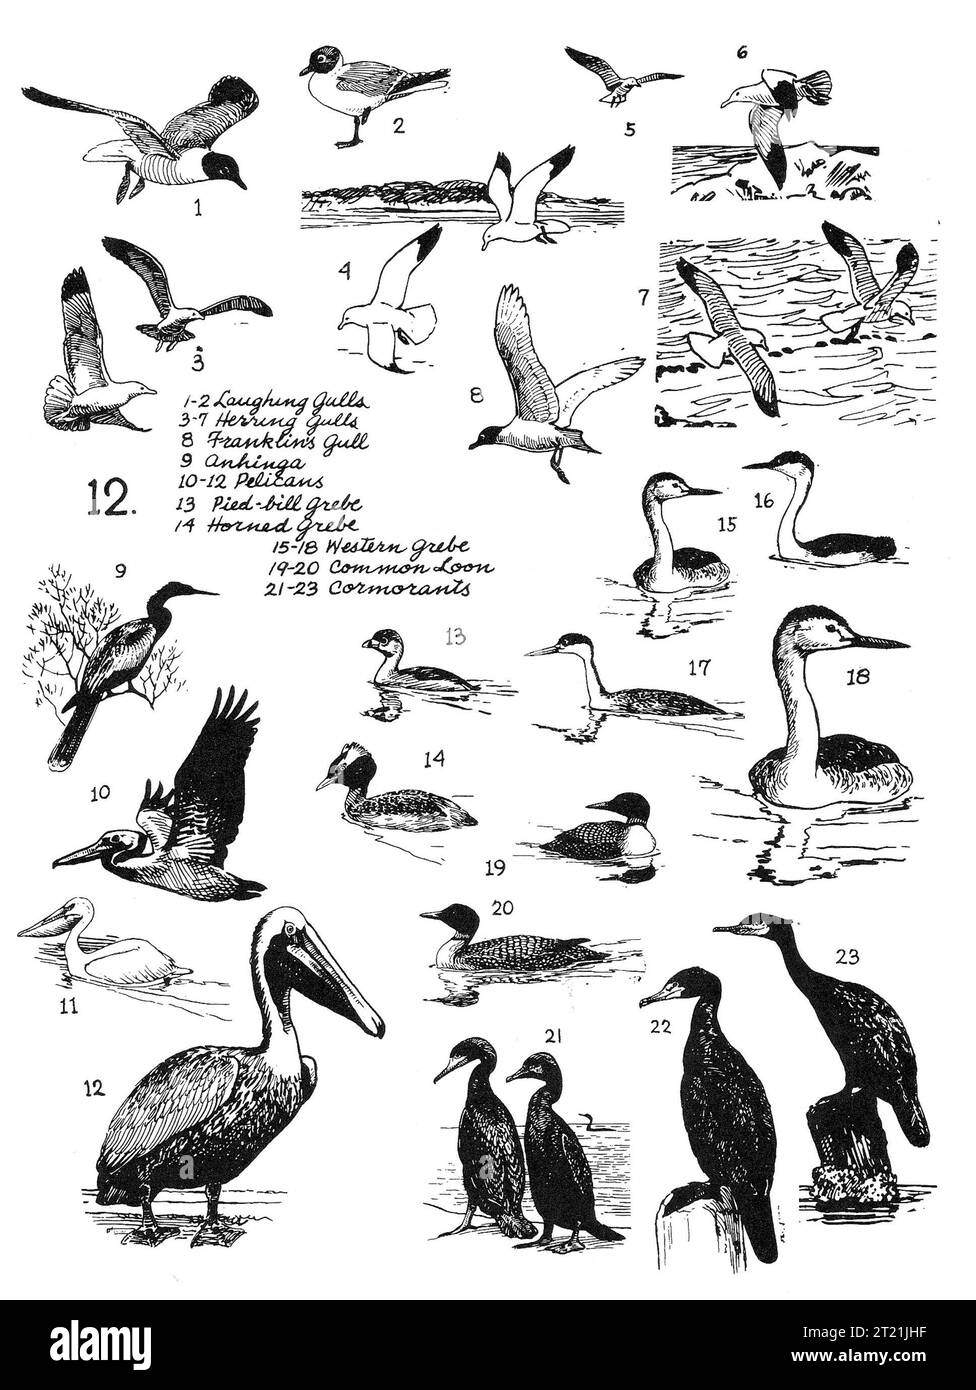 Twenty-three bird drawings including the following: laughing gull; herring gull; franklin's gull; anhinga; pelican; pied-bill grebe; horned grebe; western grebe; common loon; cormorant. Subjects: Birds; Illustrations; Wading birds; Art.  . 1998 - 2011. Stock Photo